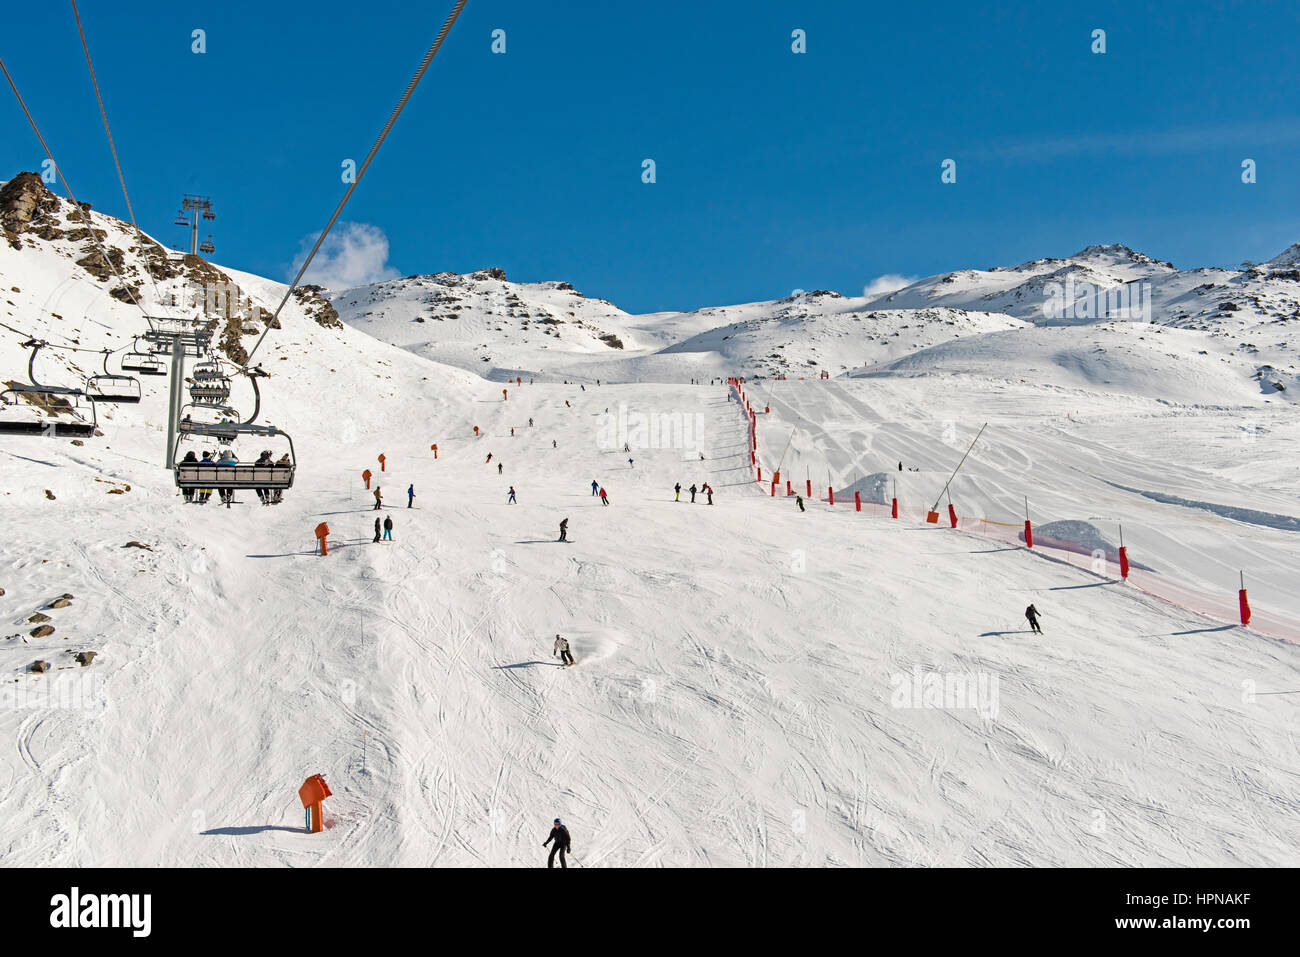 Skiers on a ski slope piste in winter alpine mountain resort with chairlift Stock Photo